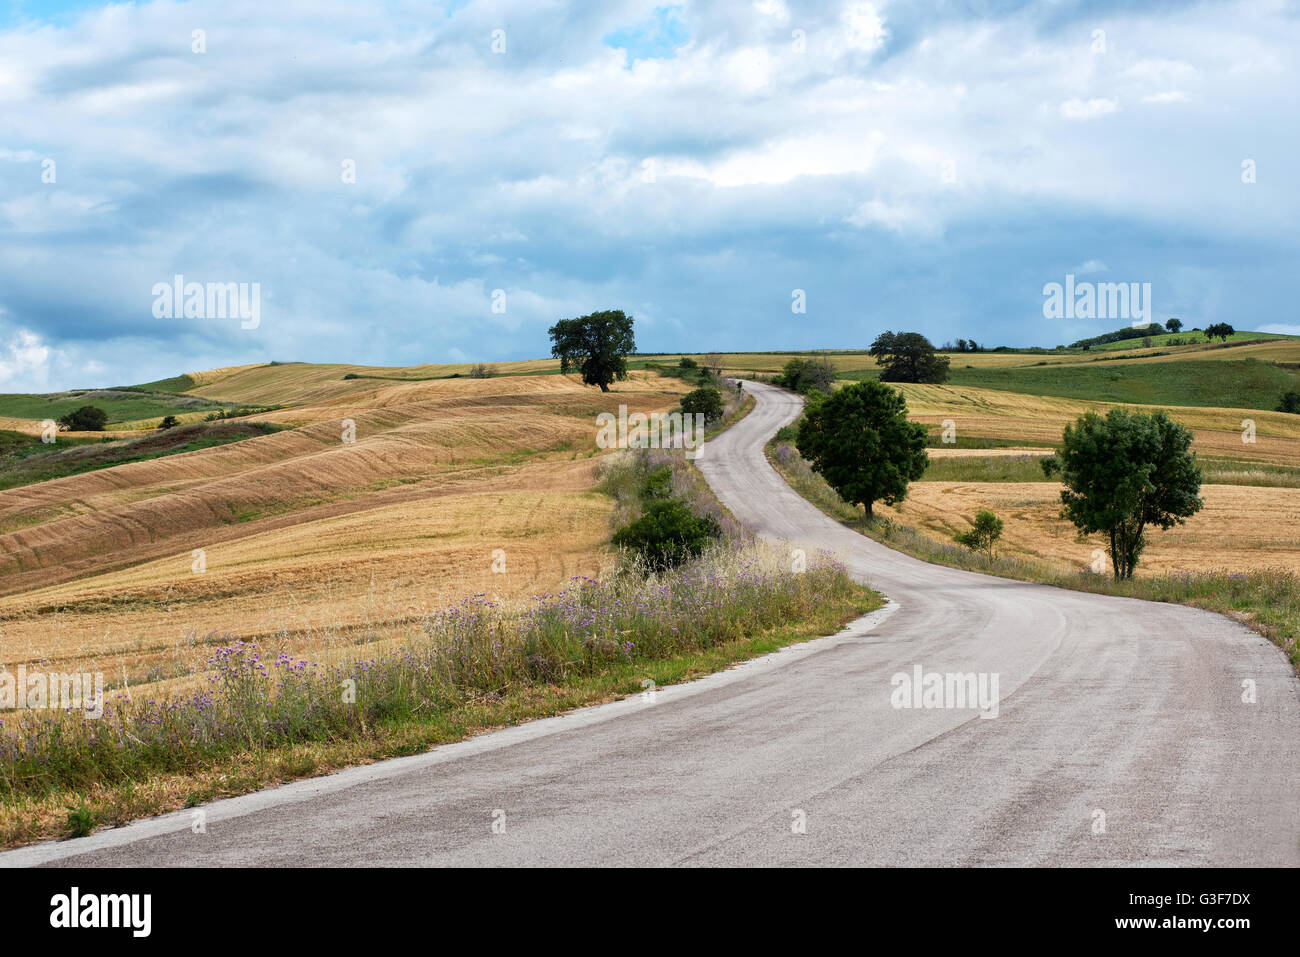 Empty asphalt road winding into the distance through hills through agricultural farmland on a cloudy day Stock Photo